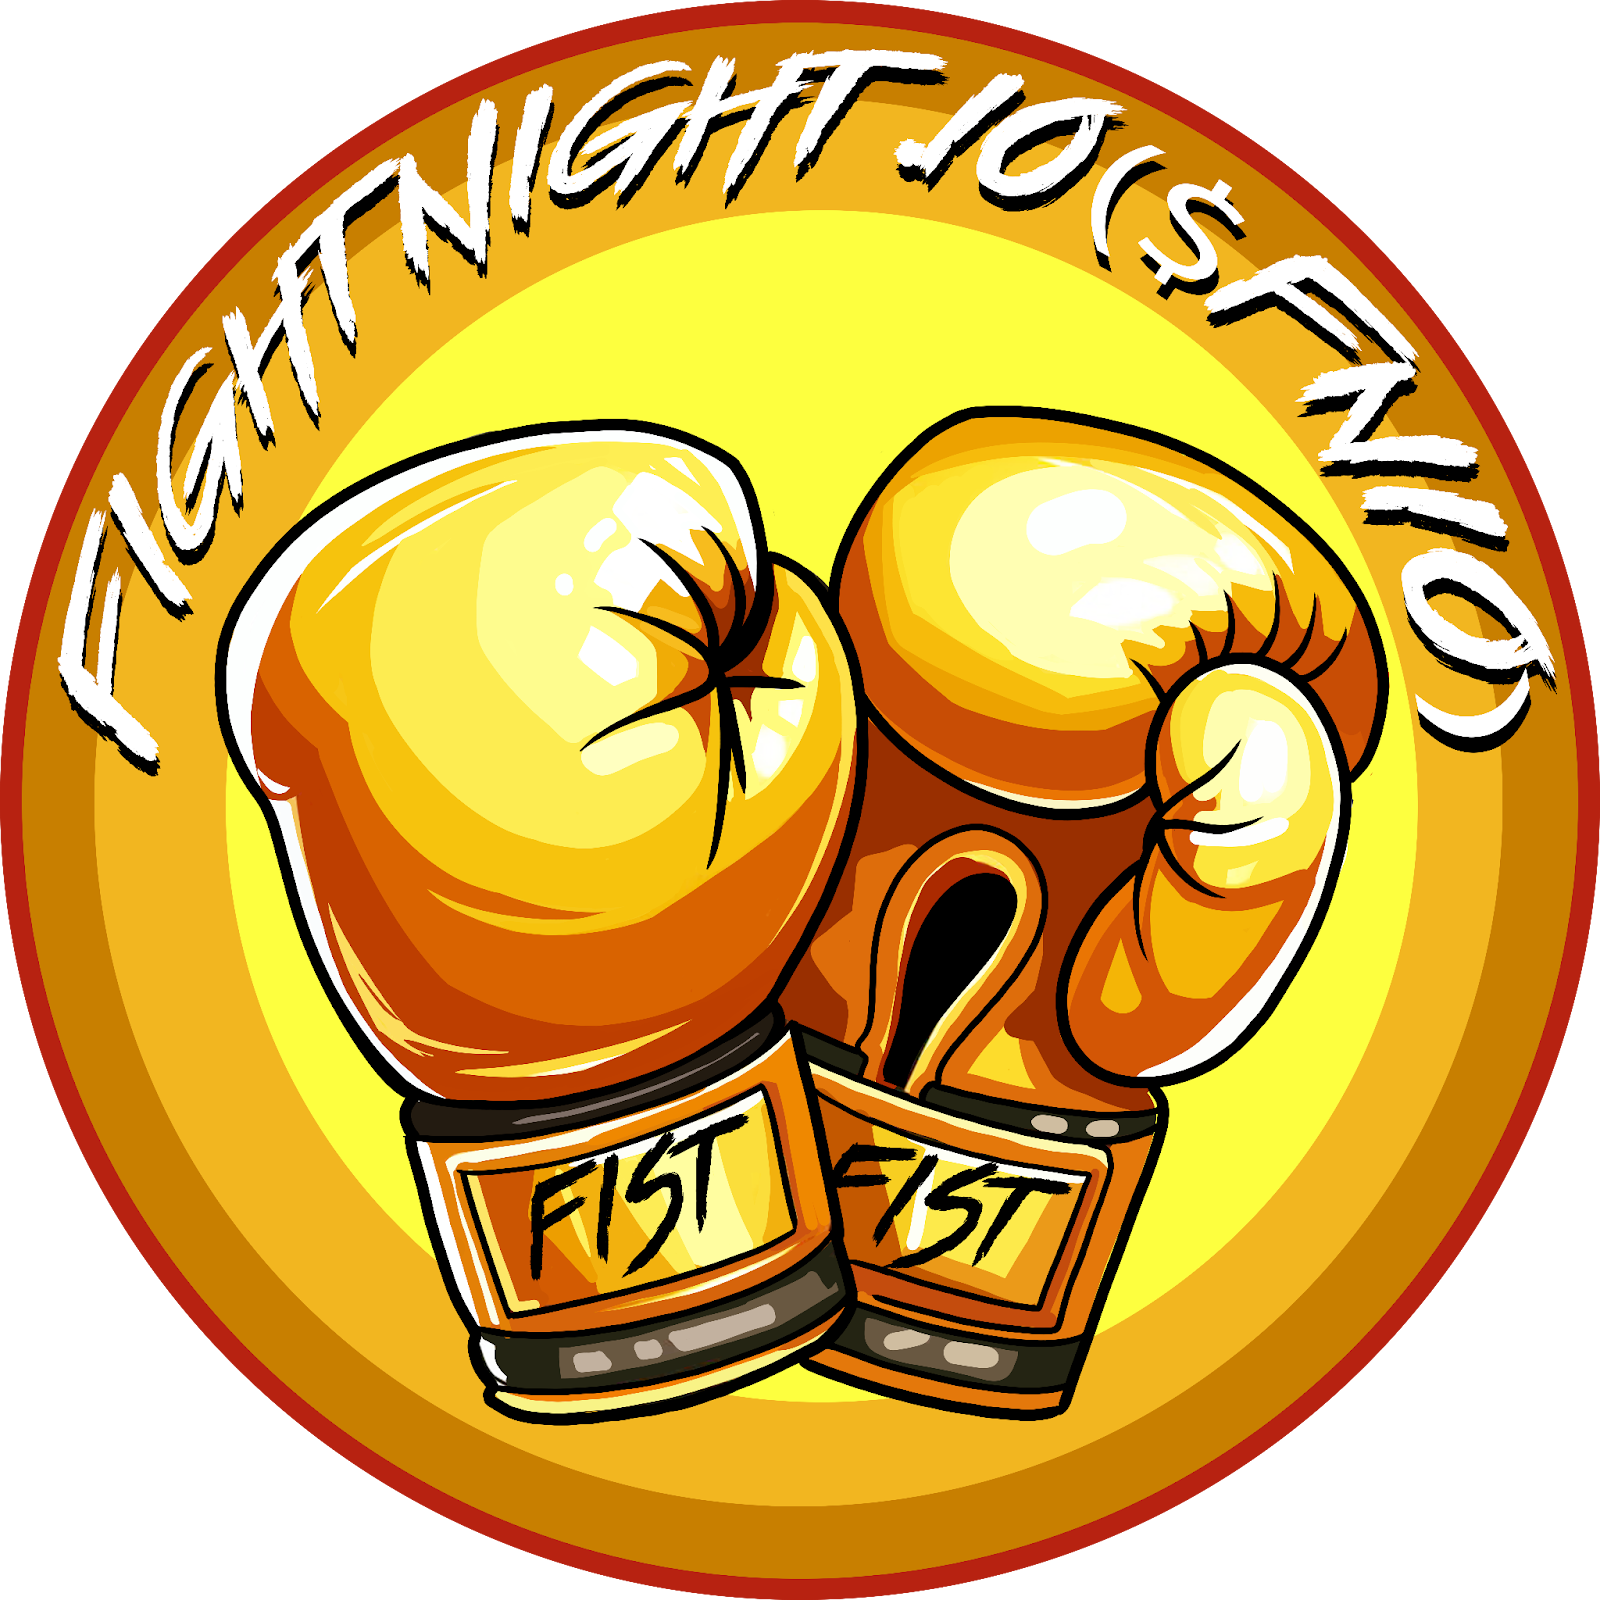 Move Over Pepe and Bonk: Fight Night is the Latest Meme Coin to Watch